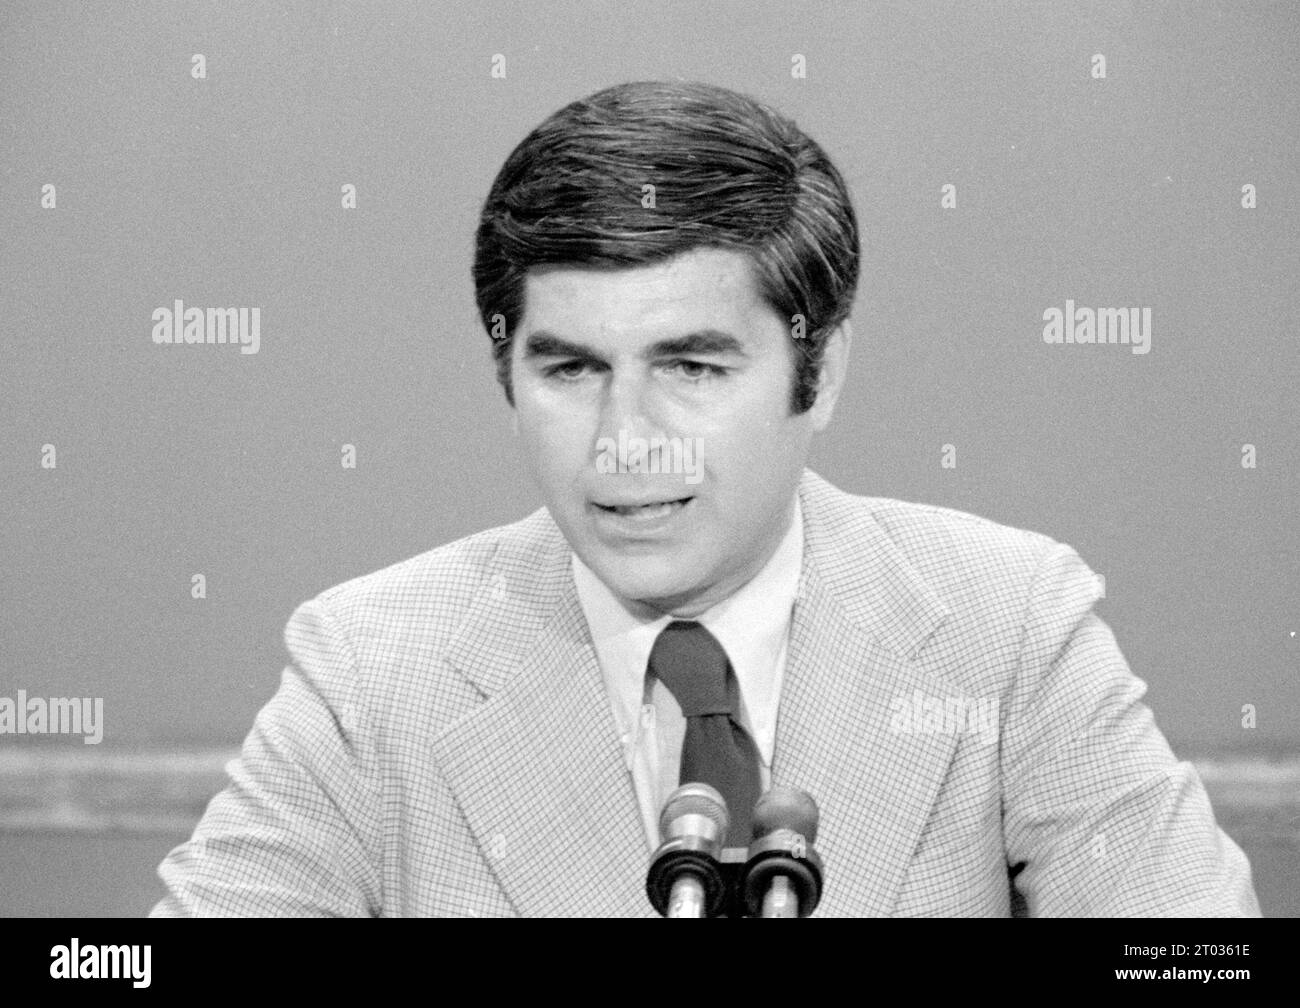 Democratic Convention in N.Y.C.  Michael Dukakis in 1976, USA Stock Photo